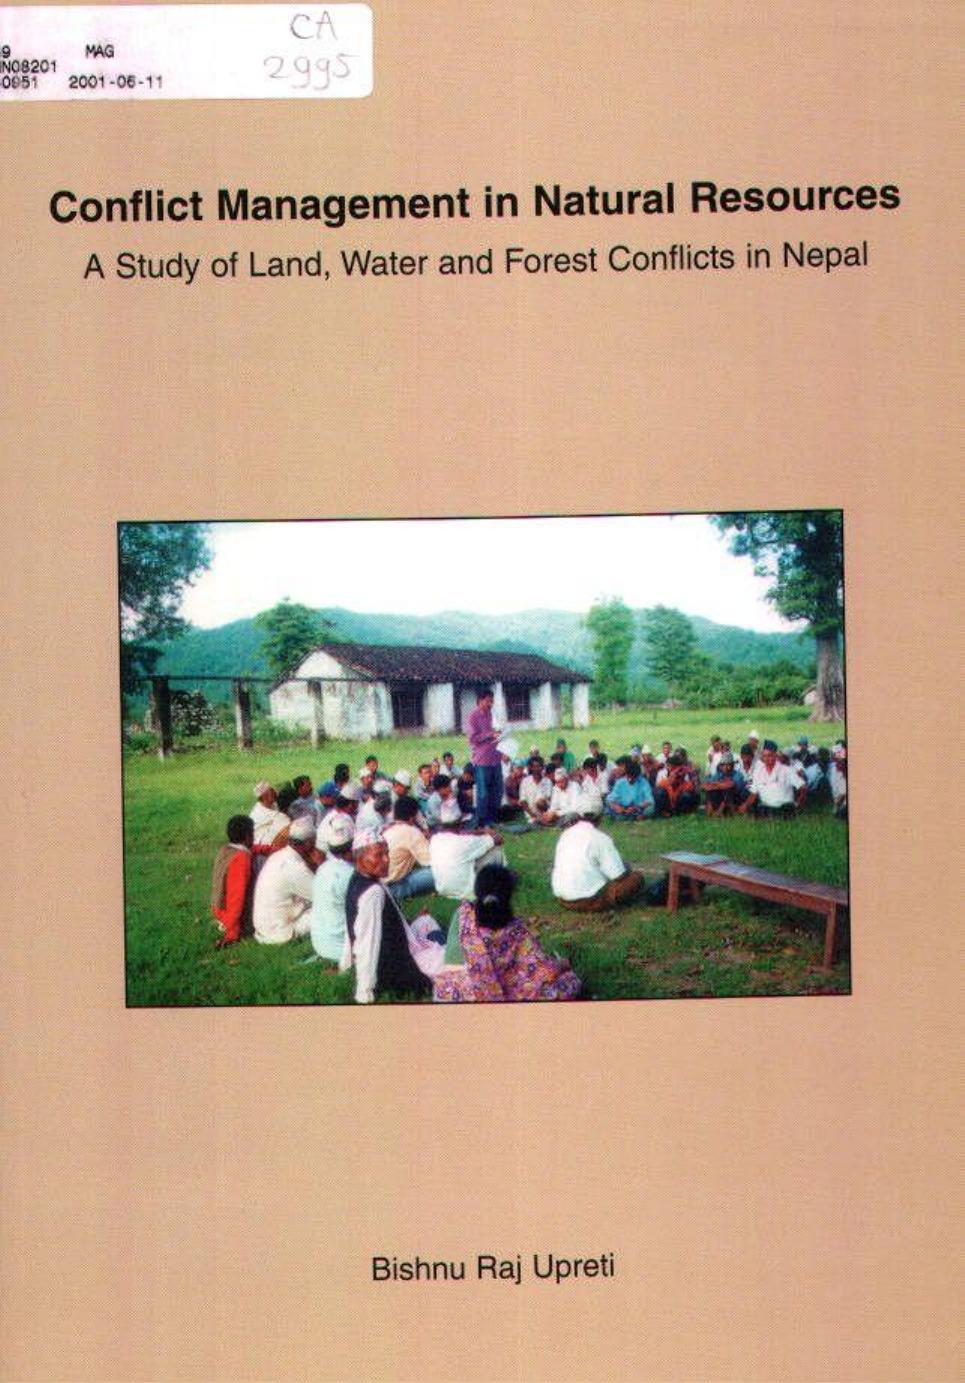 Conflict management in natural resources   a study of land, water and forest conflicts in NepaI 2001